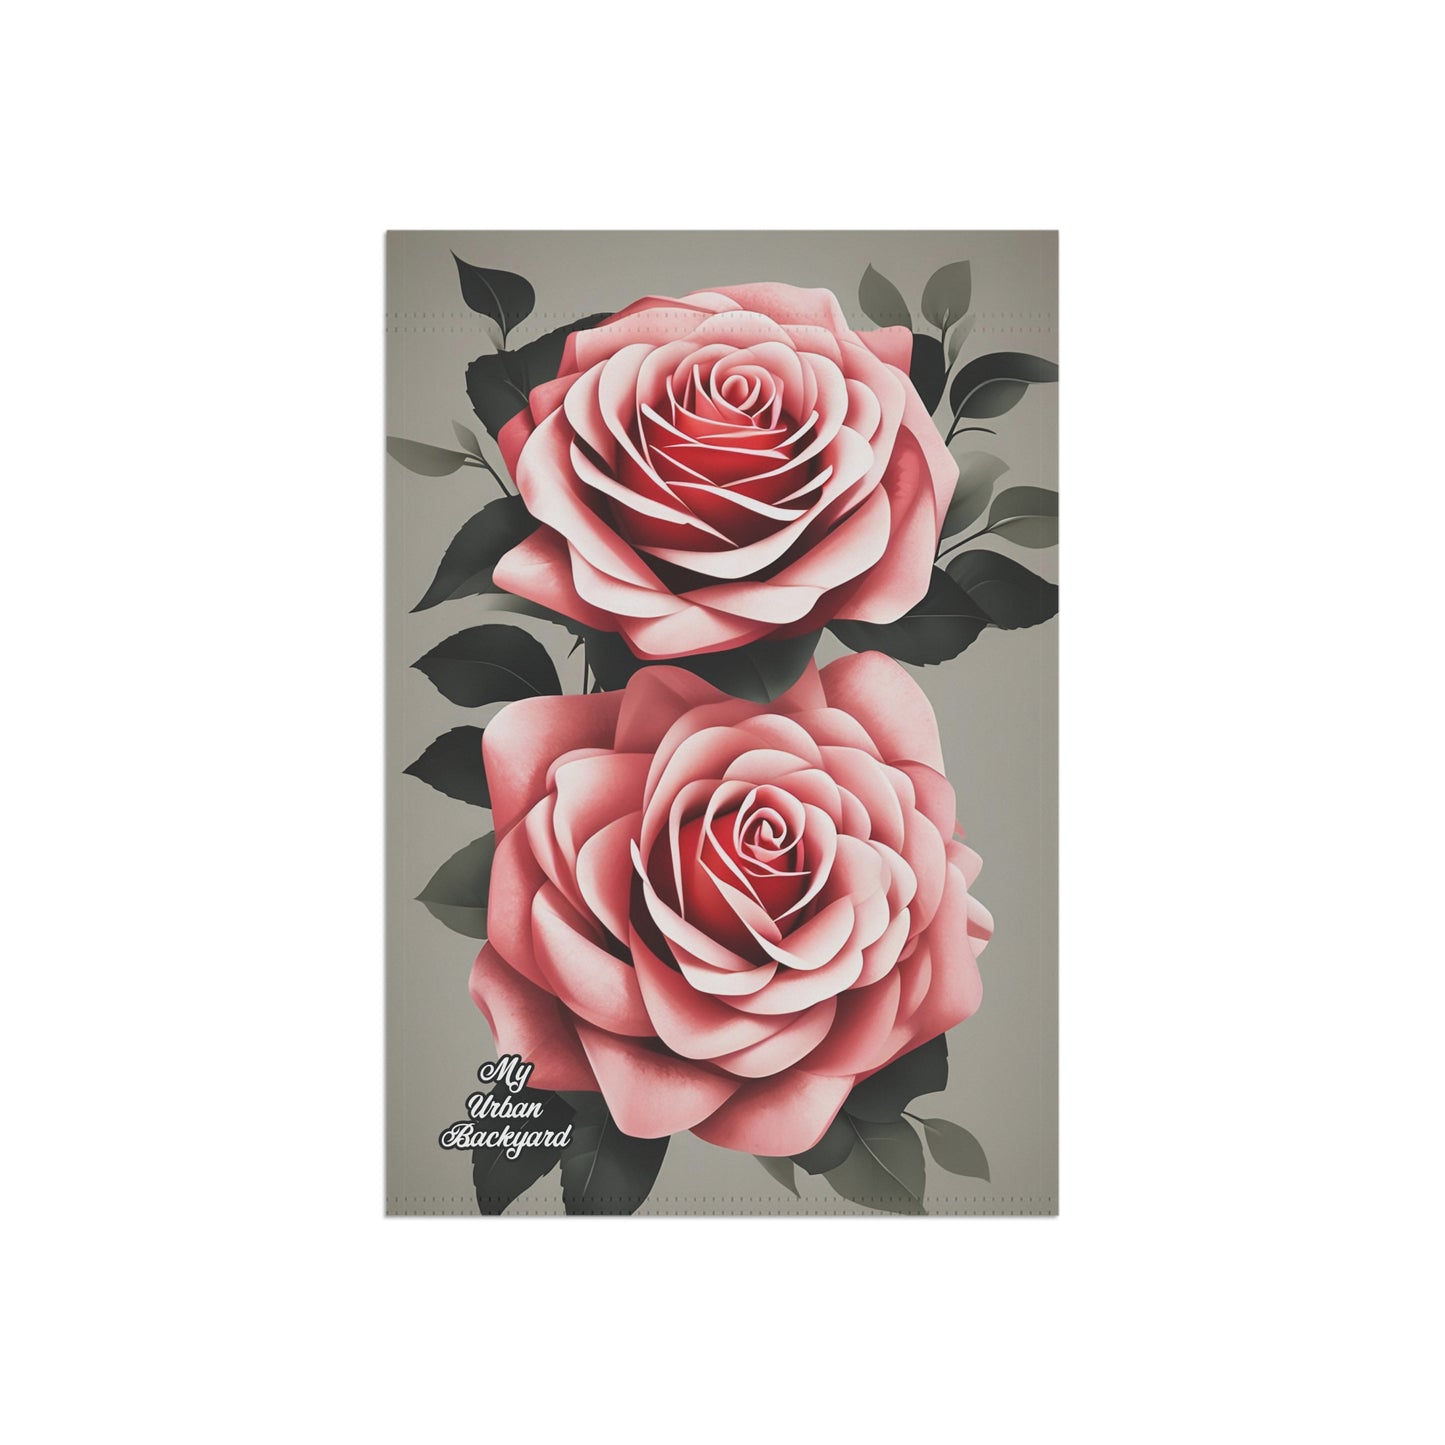 Two Pink Rose Flowers, Garden Flag for Yard, Patio, Porch, or Work, 12"x18" - Flag only